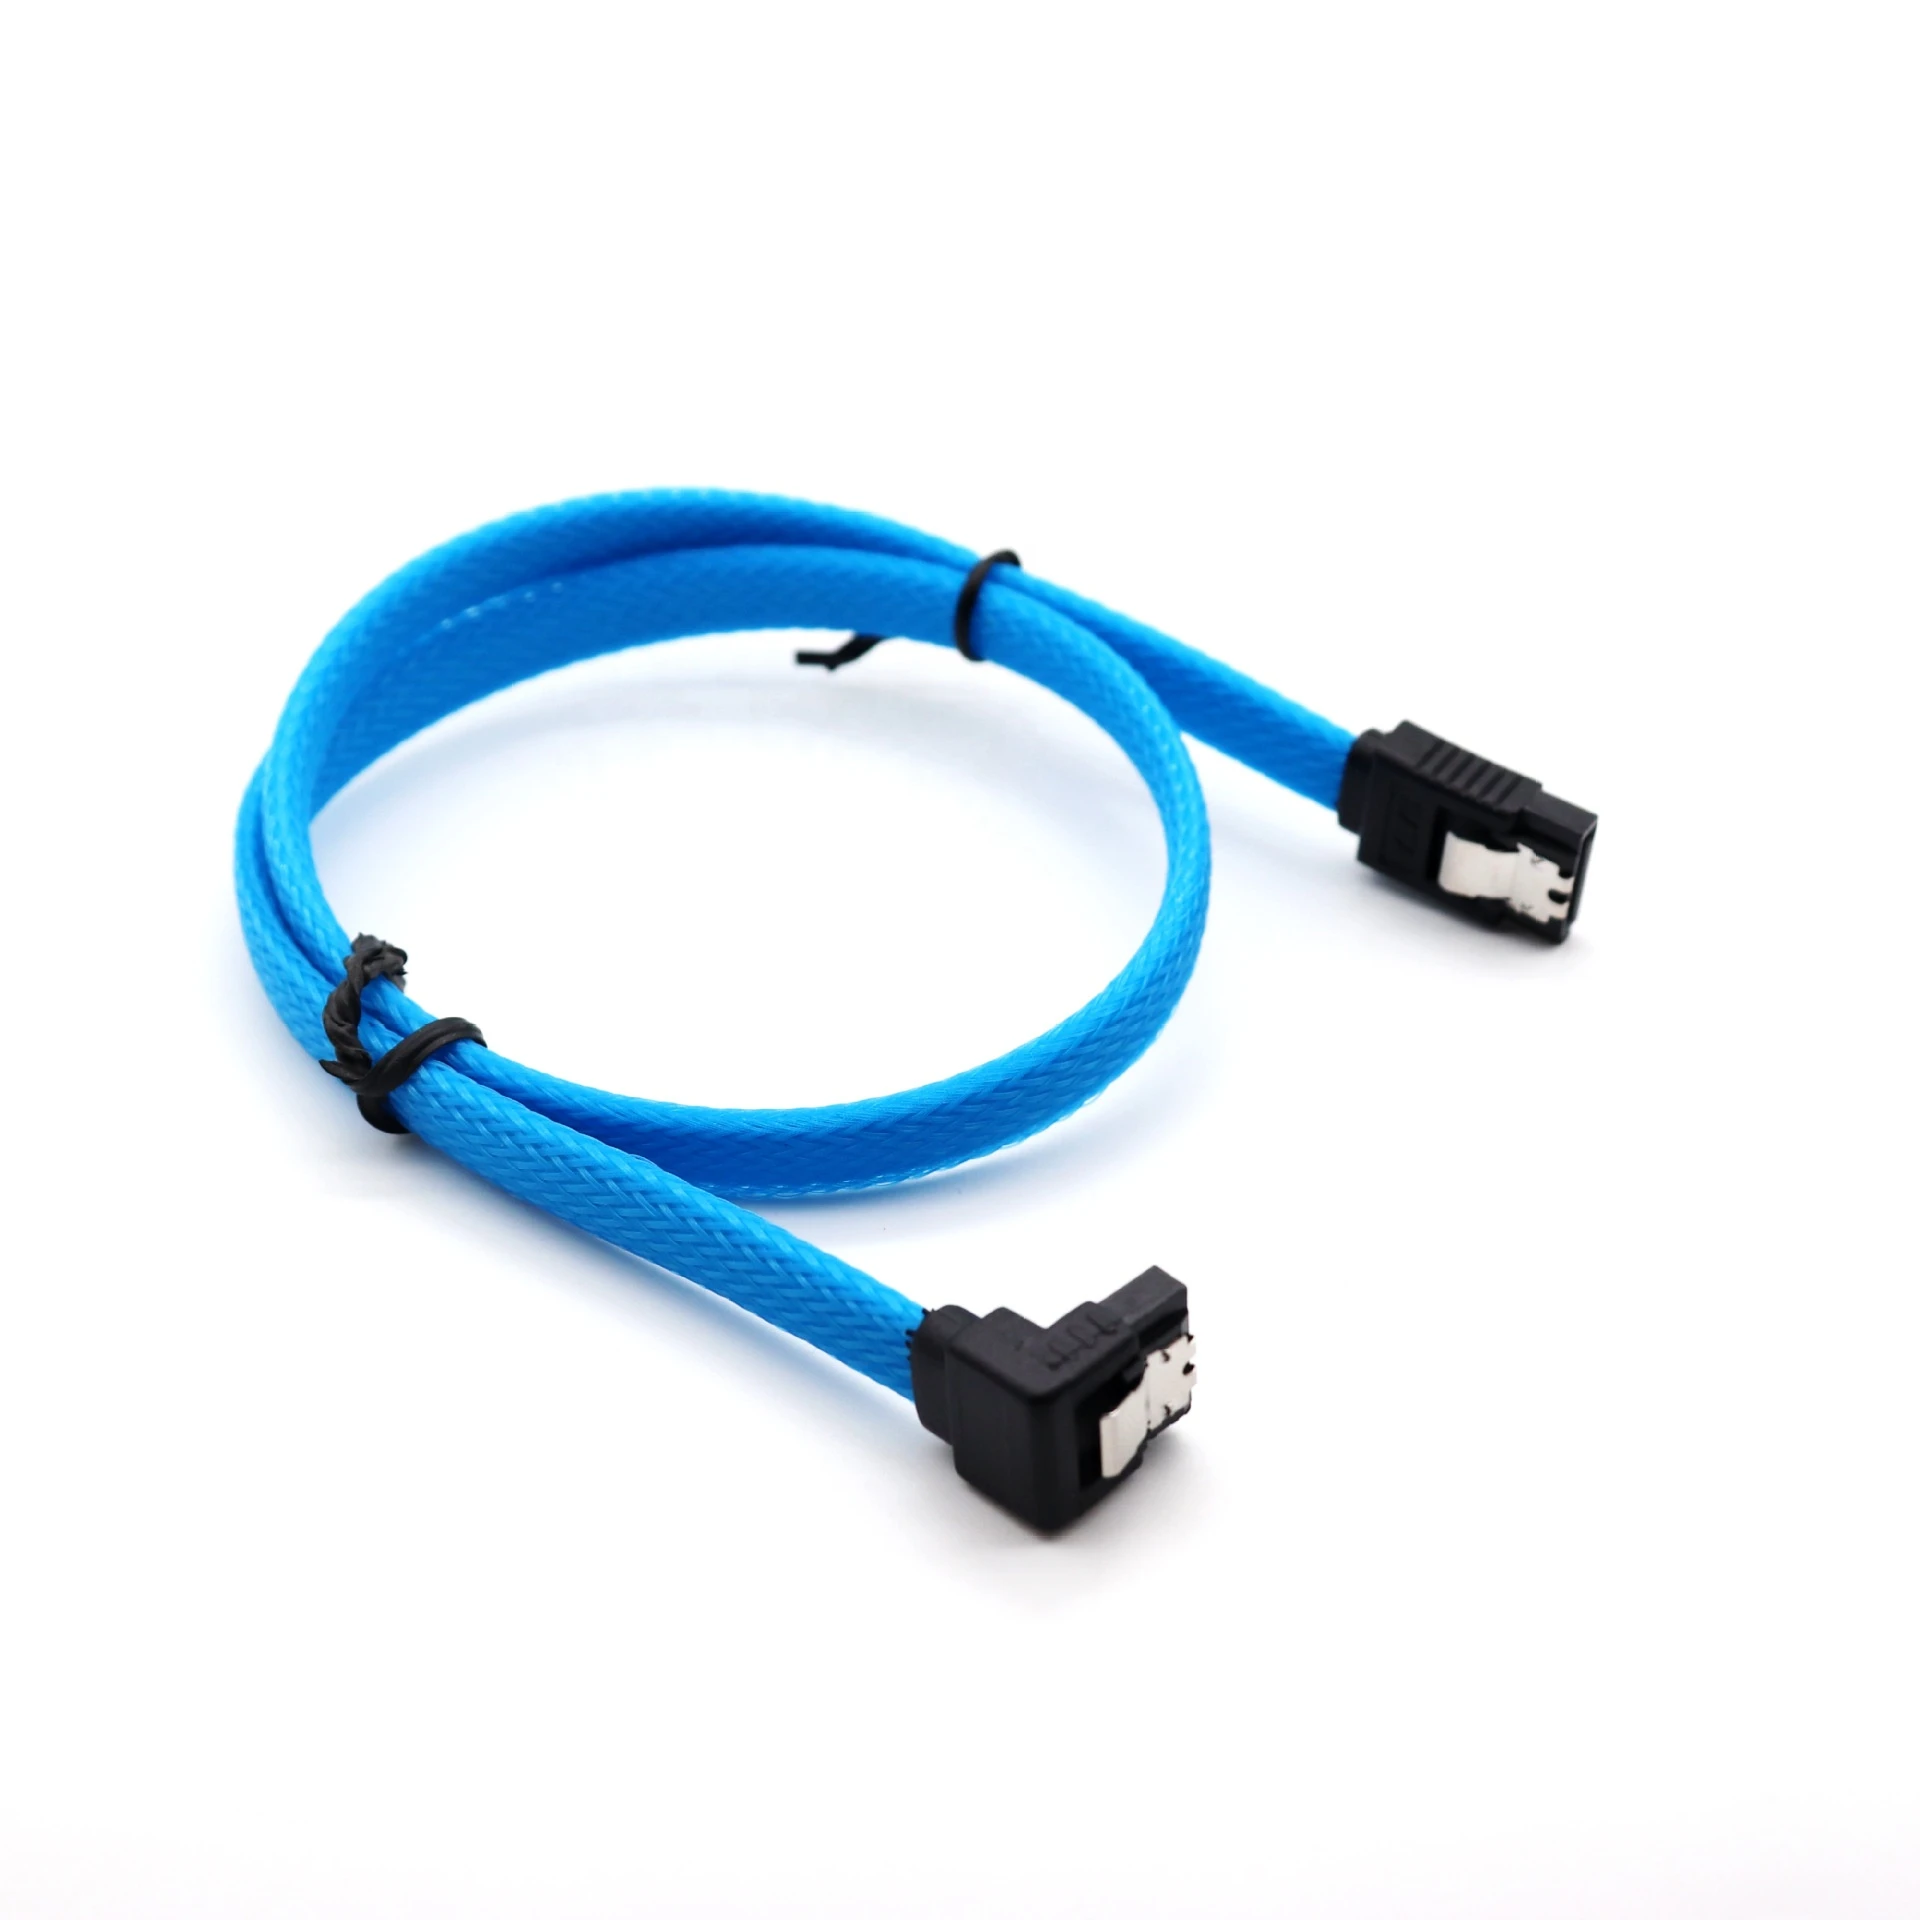 50CM SATA 3.0 III SATA3 7pin Data Cable Right Angle 6Gb/s SSD Cables HDD Hard Disk Data Cord with Nylon Sleeved